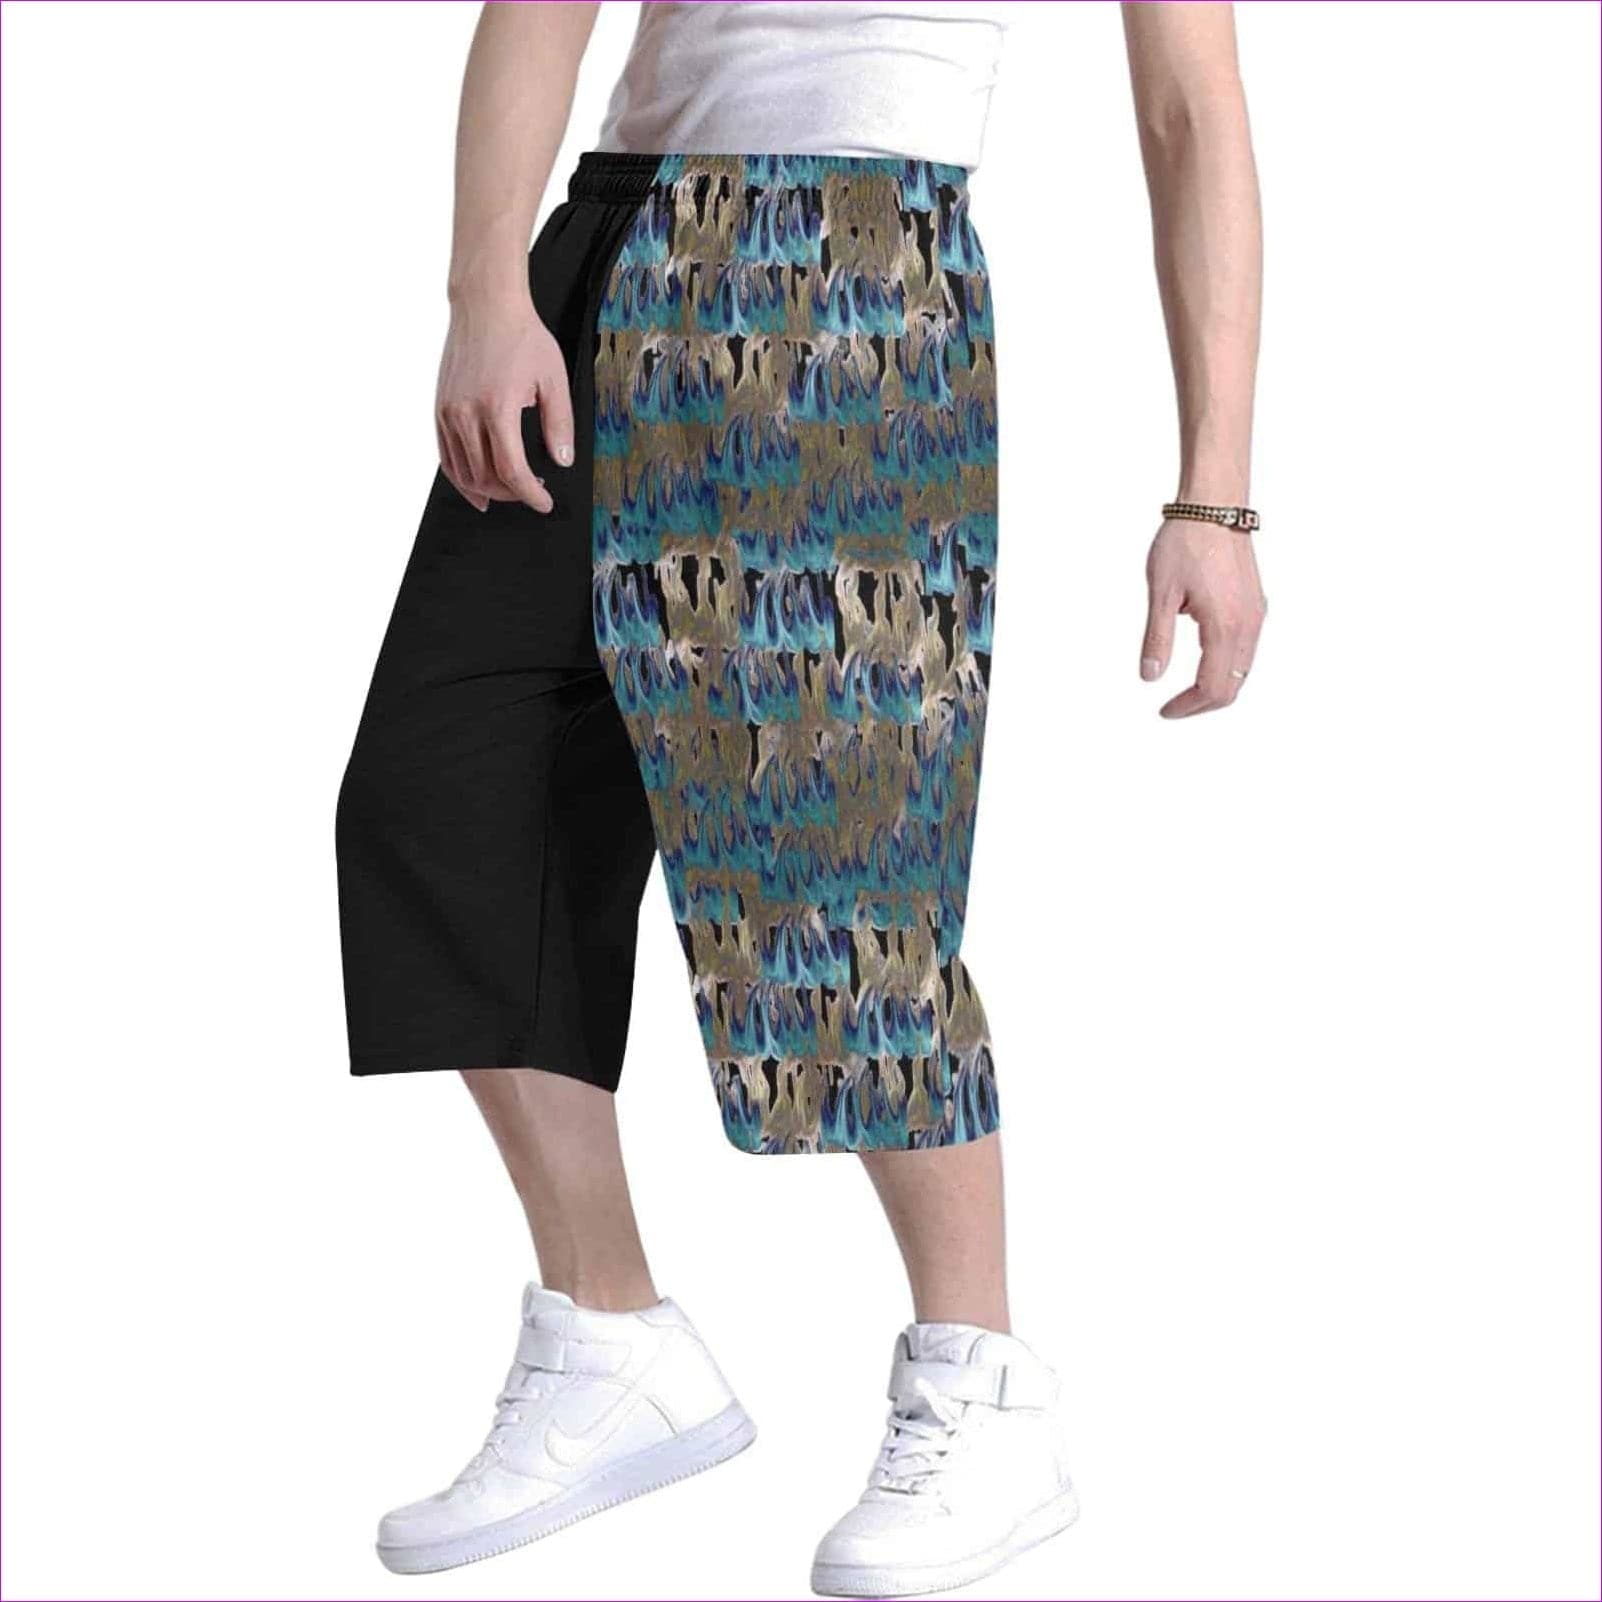 TSWG Flame Men's All Over Print Baggy Shorts (Model L37) - TSWG Flame Baggy Shorts for Men - 2 Styles - mens shorts at TFC&H Co.